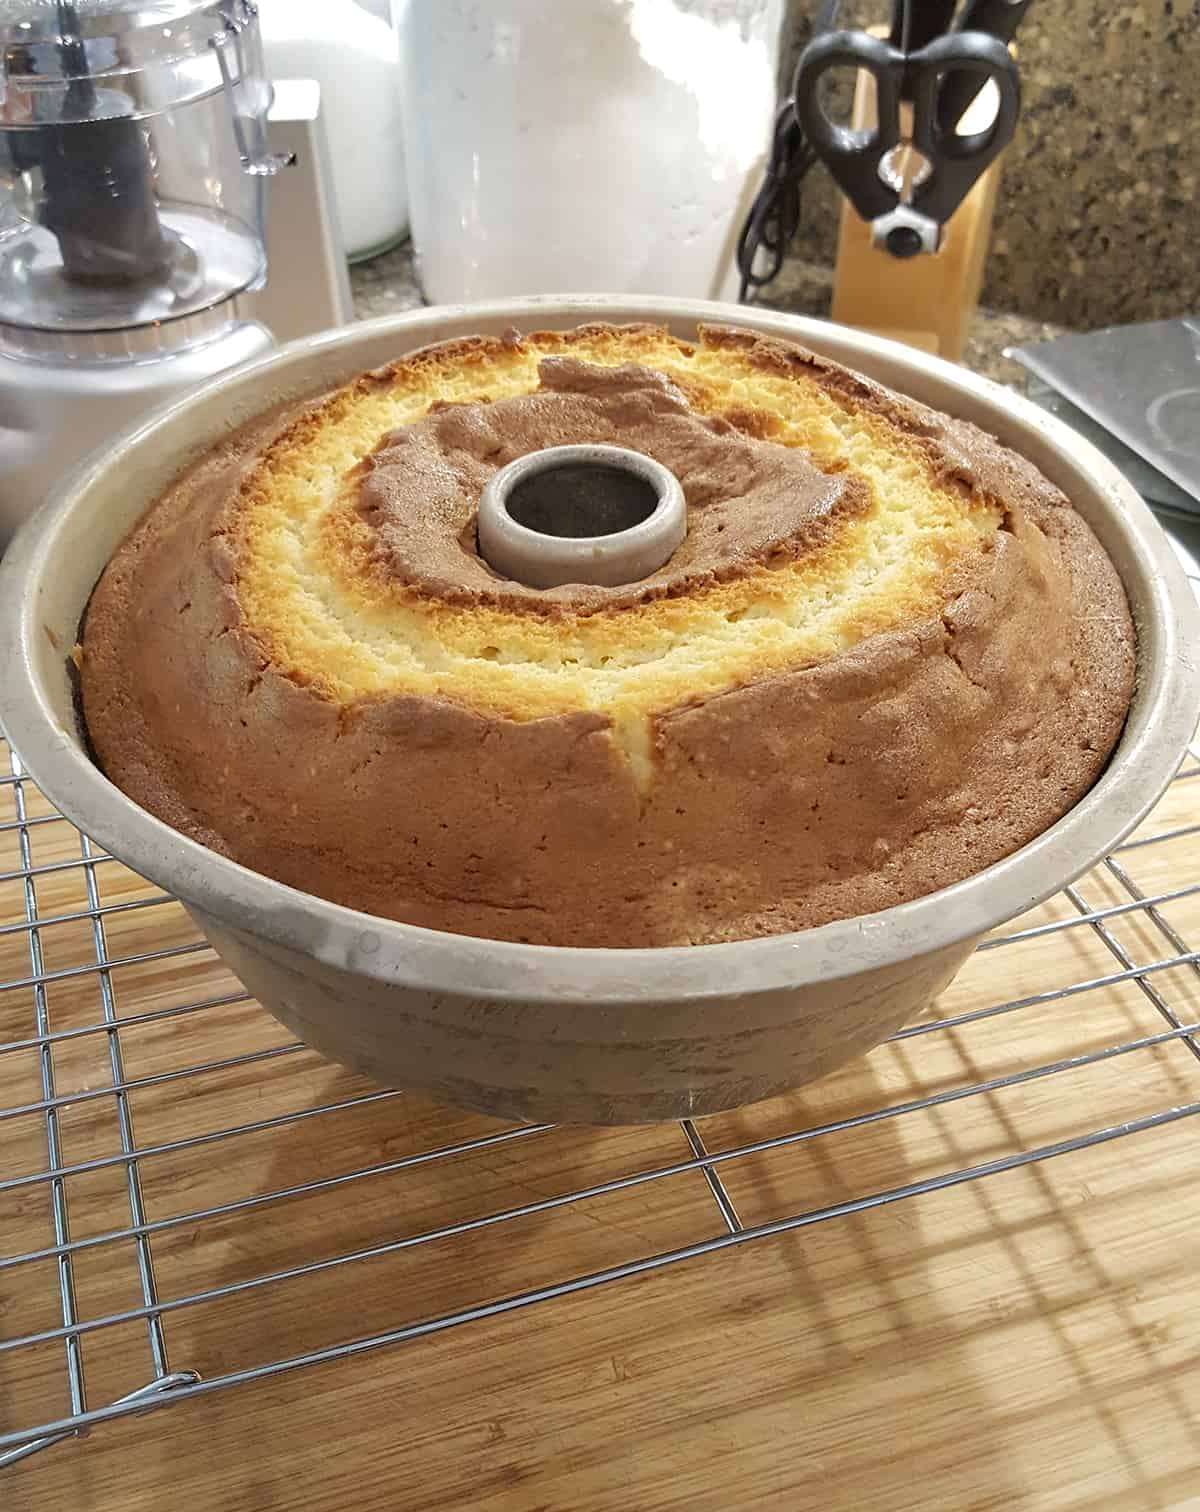 Cake cooling in pan on a rack.